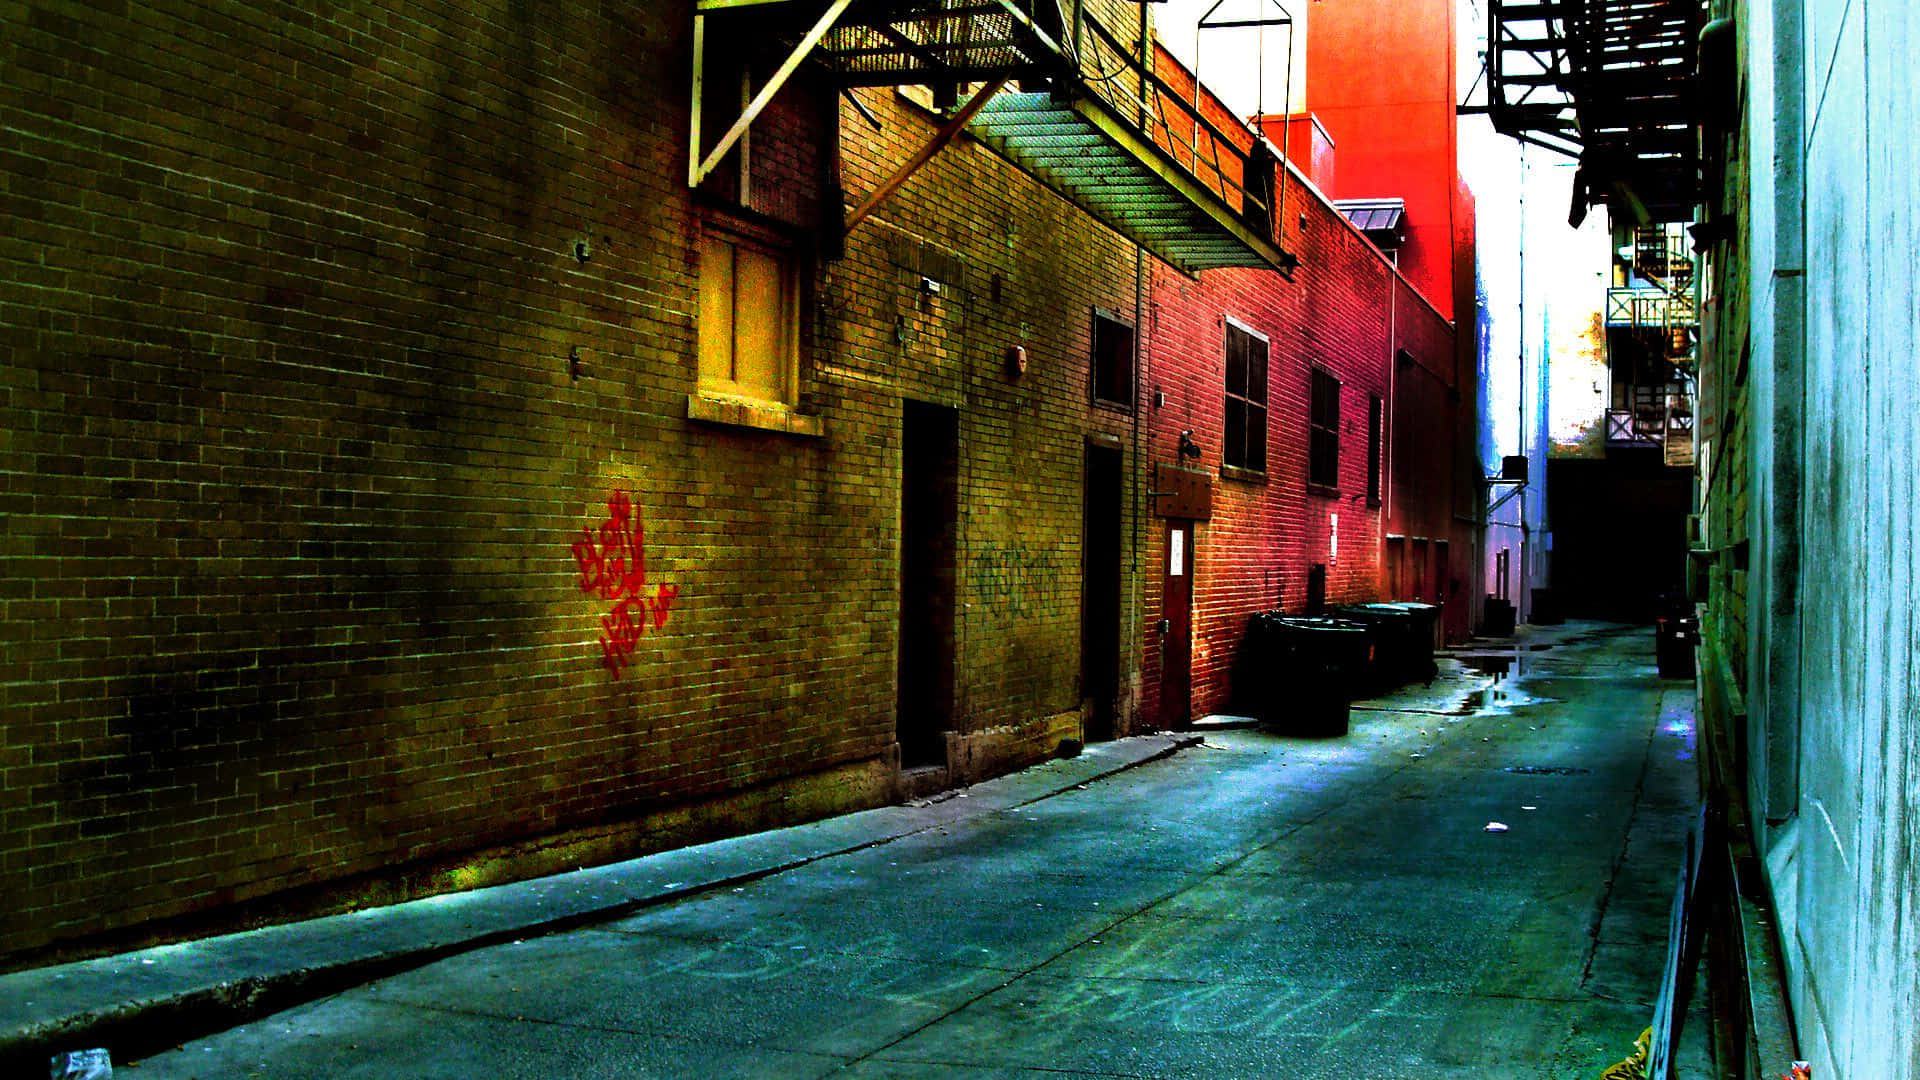 A Narrow Alleyway With A Fire Hydrant